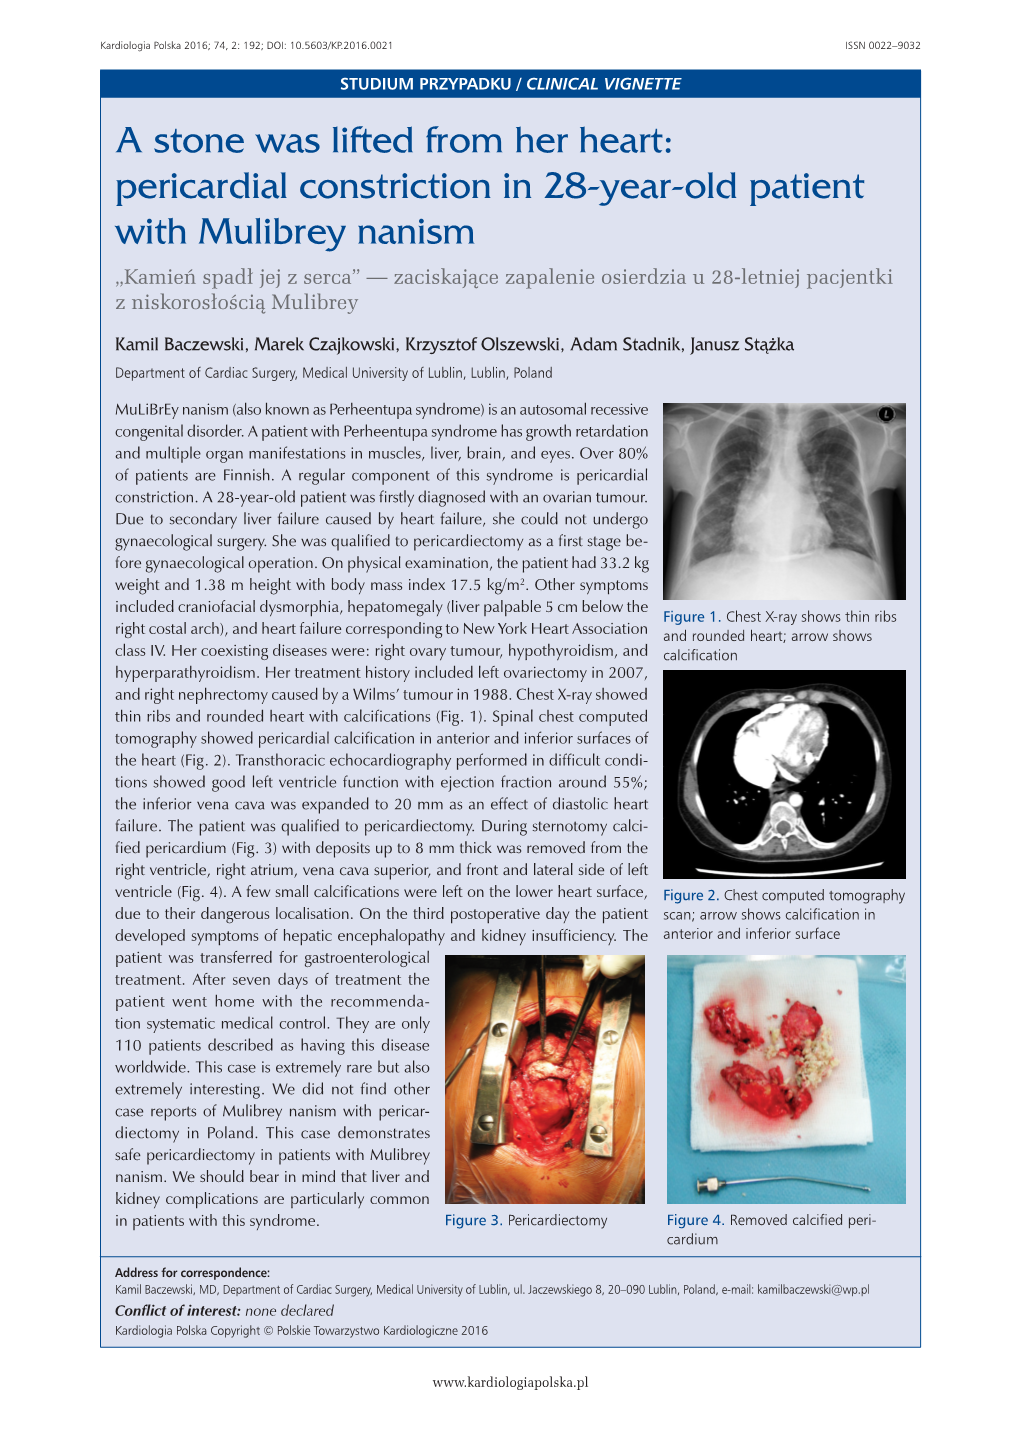 Pericardial Constriction in 28-Year-Old Patient with Mulibrey Nanism